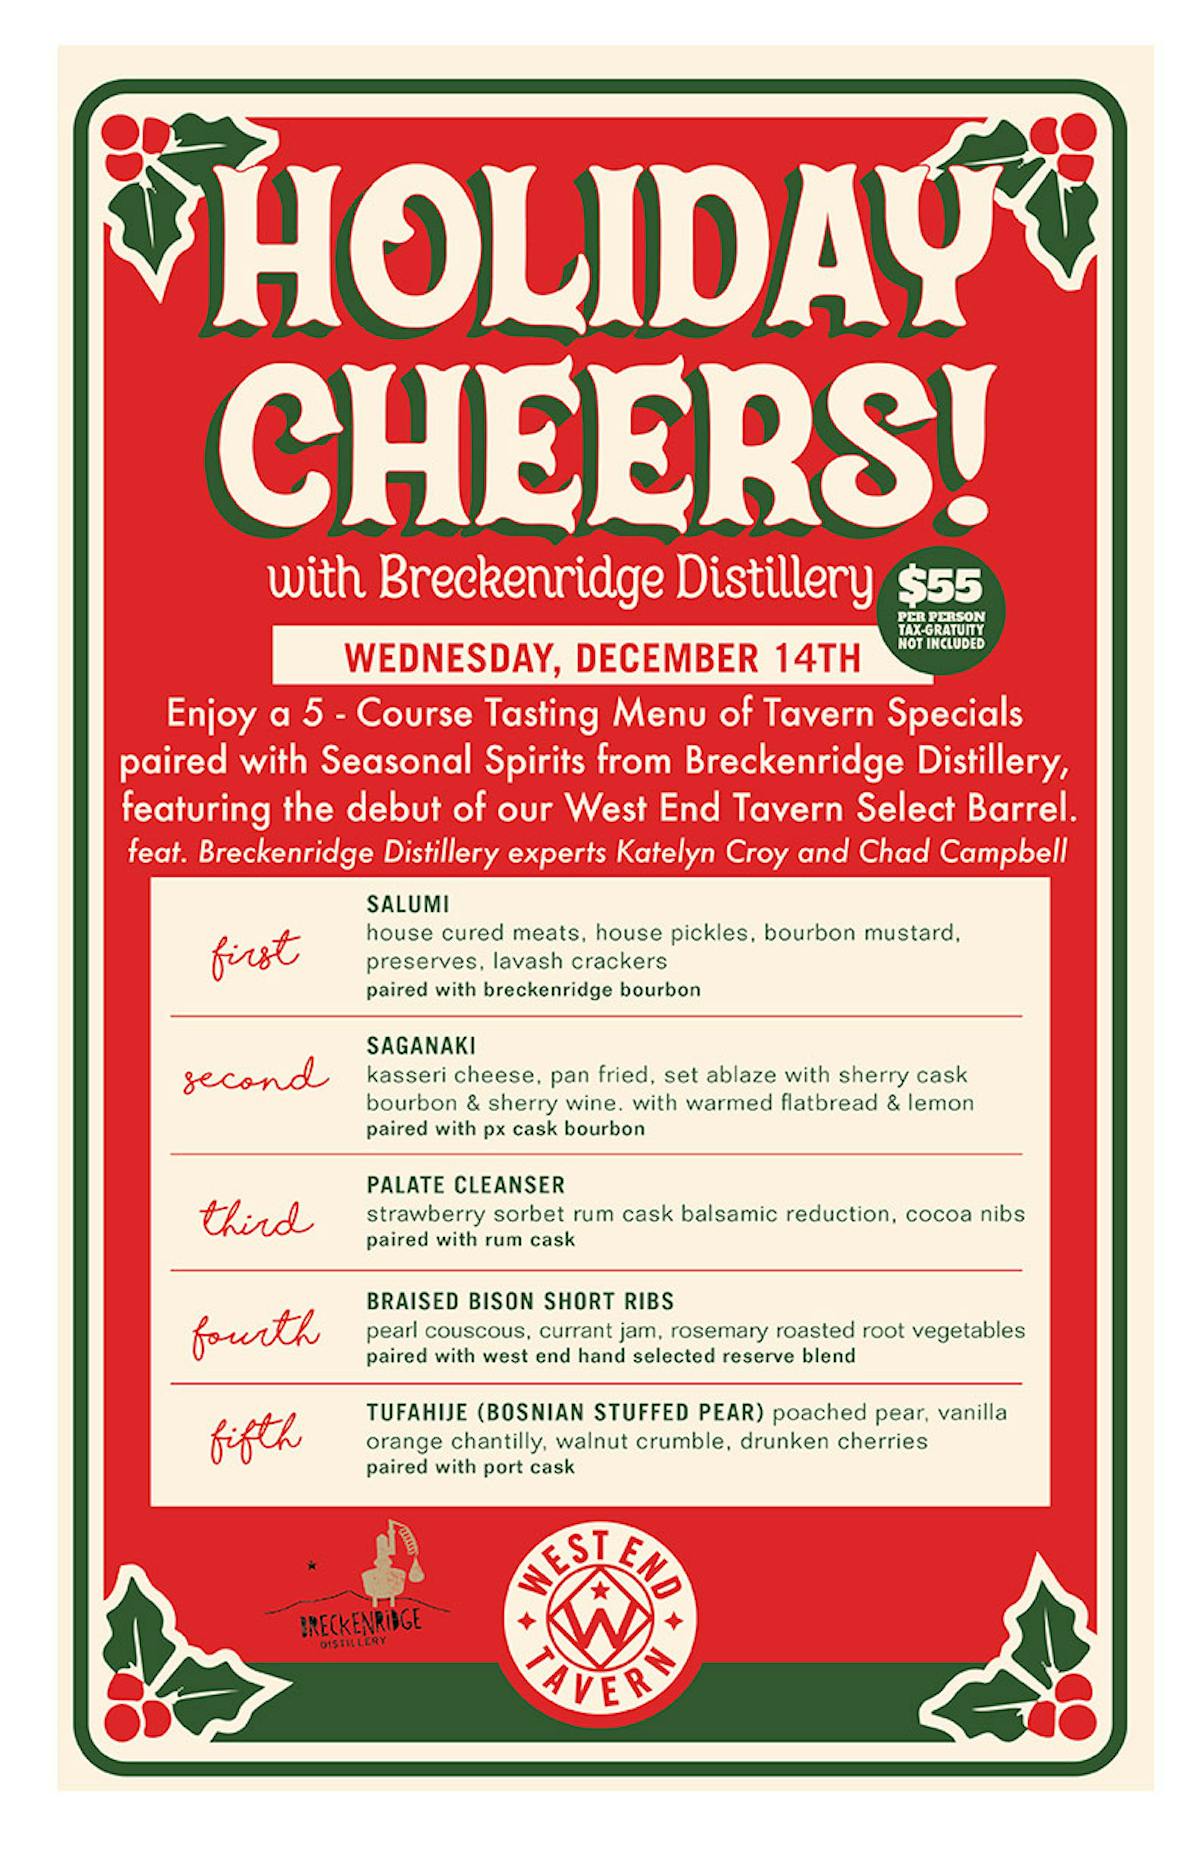 Holiday Cheers! with Breckenridge Distillery